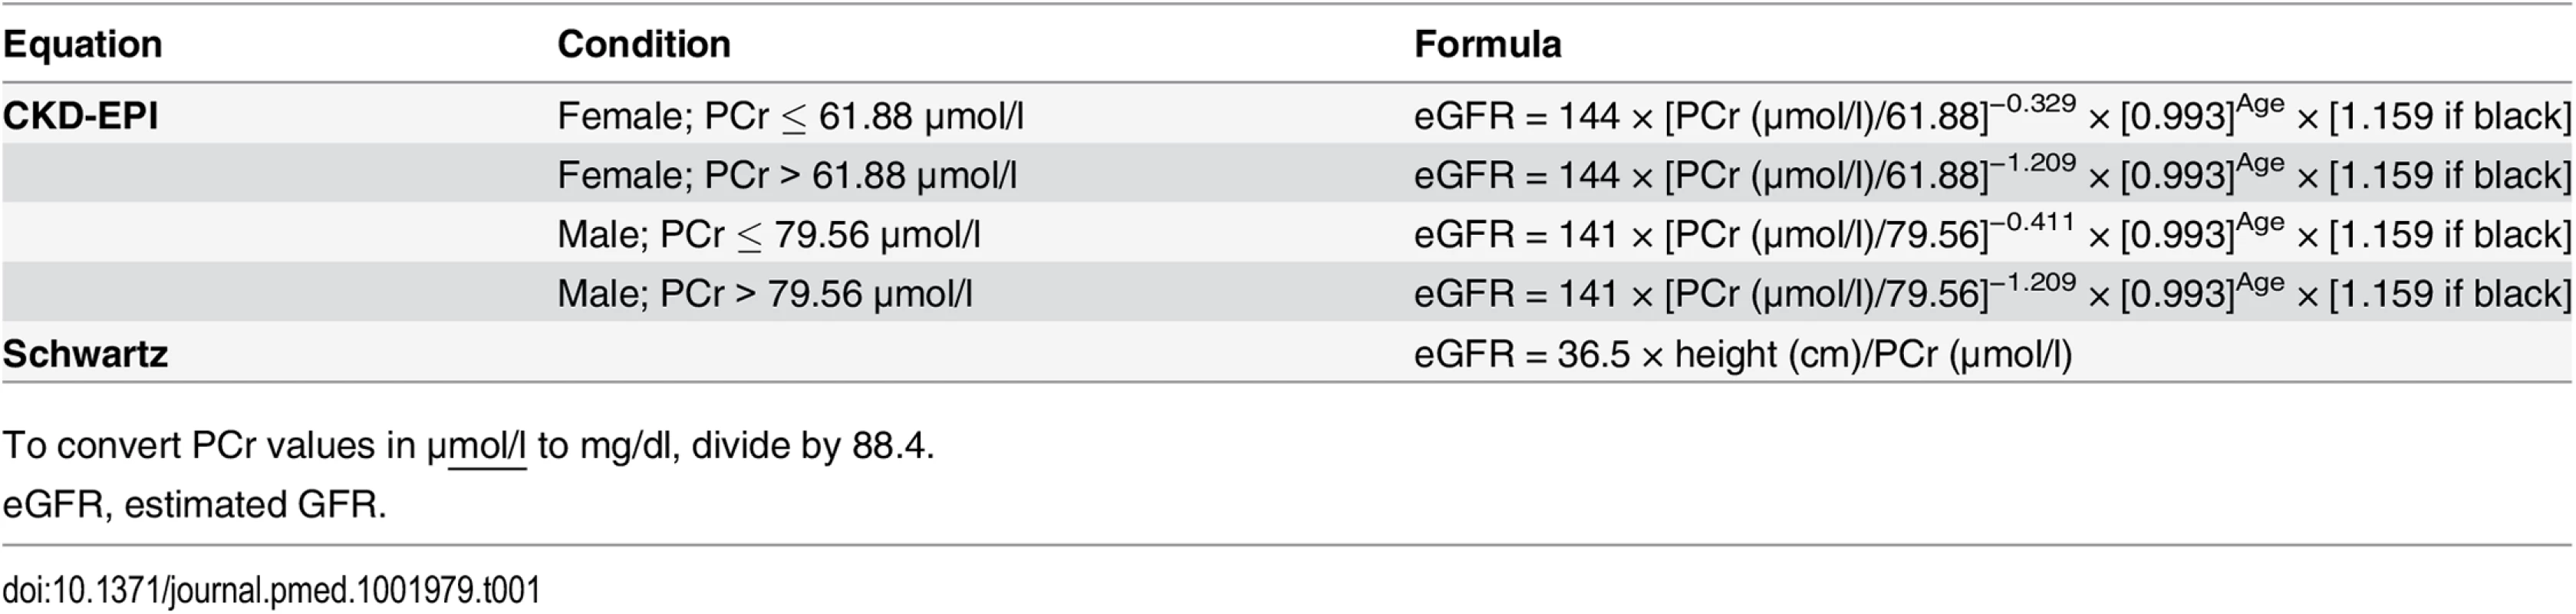 Formulas used for the estimation of glomerular filtration rate (ml/min/1.73 m<sup>2</sup>).